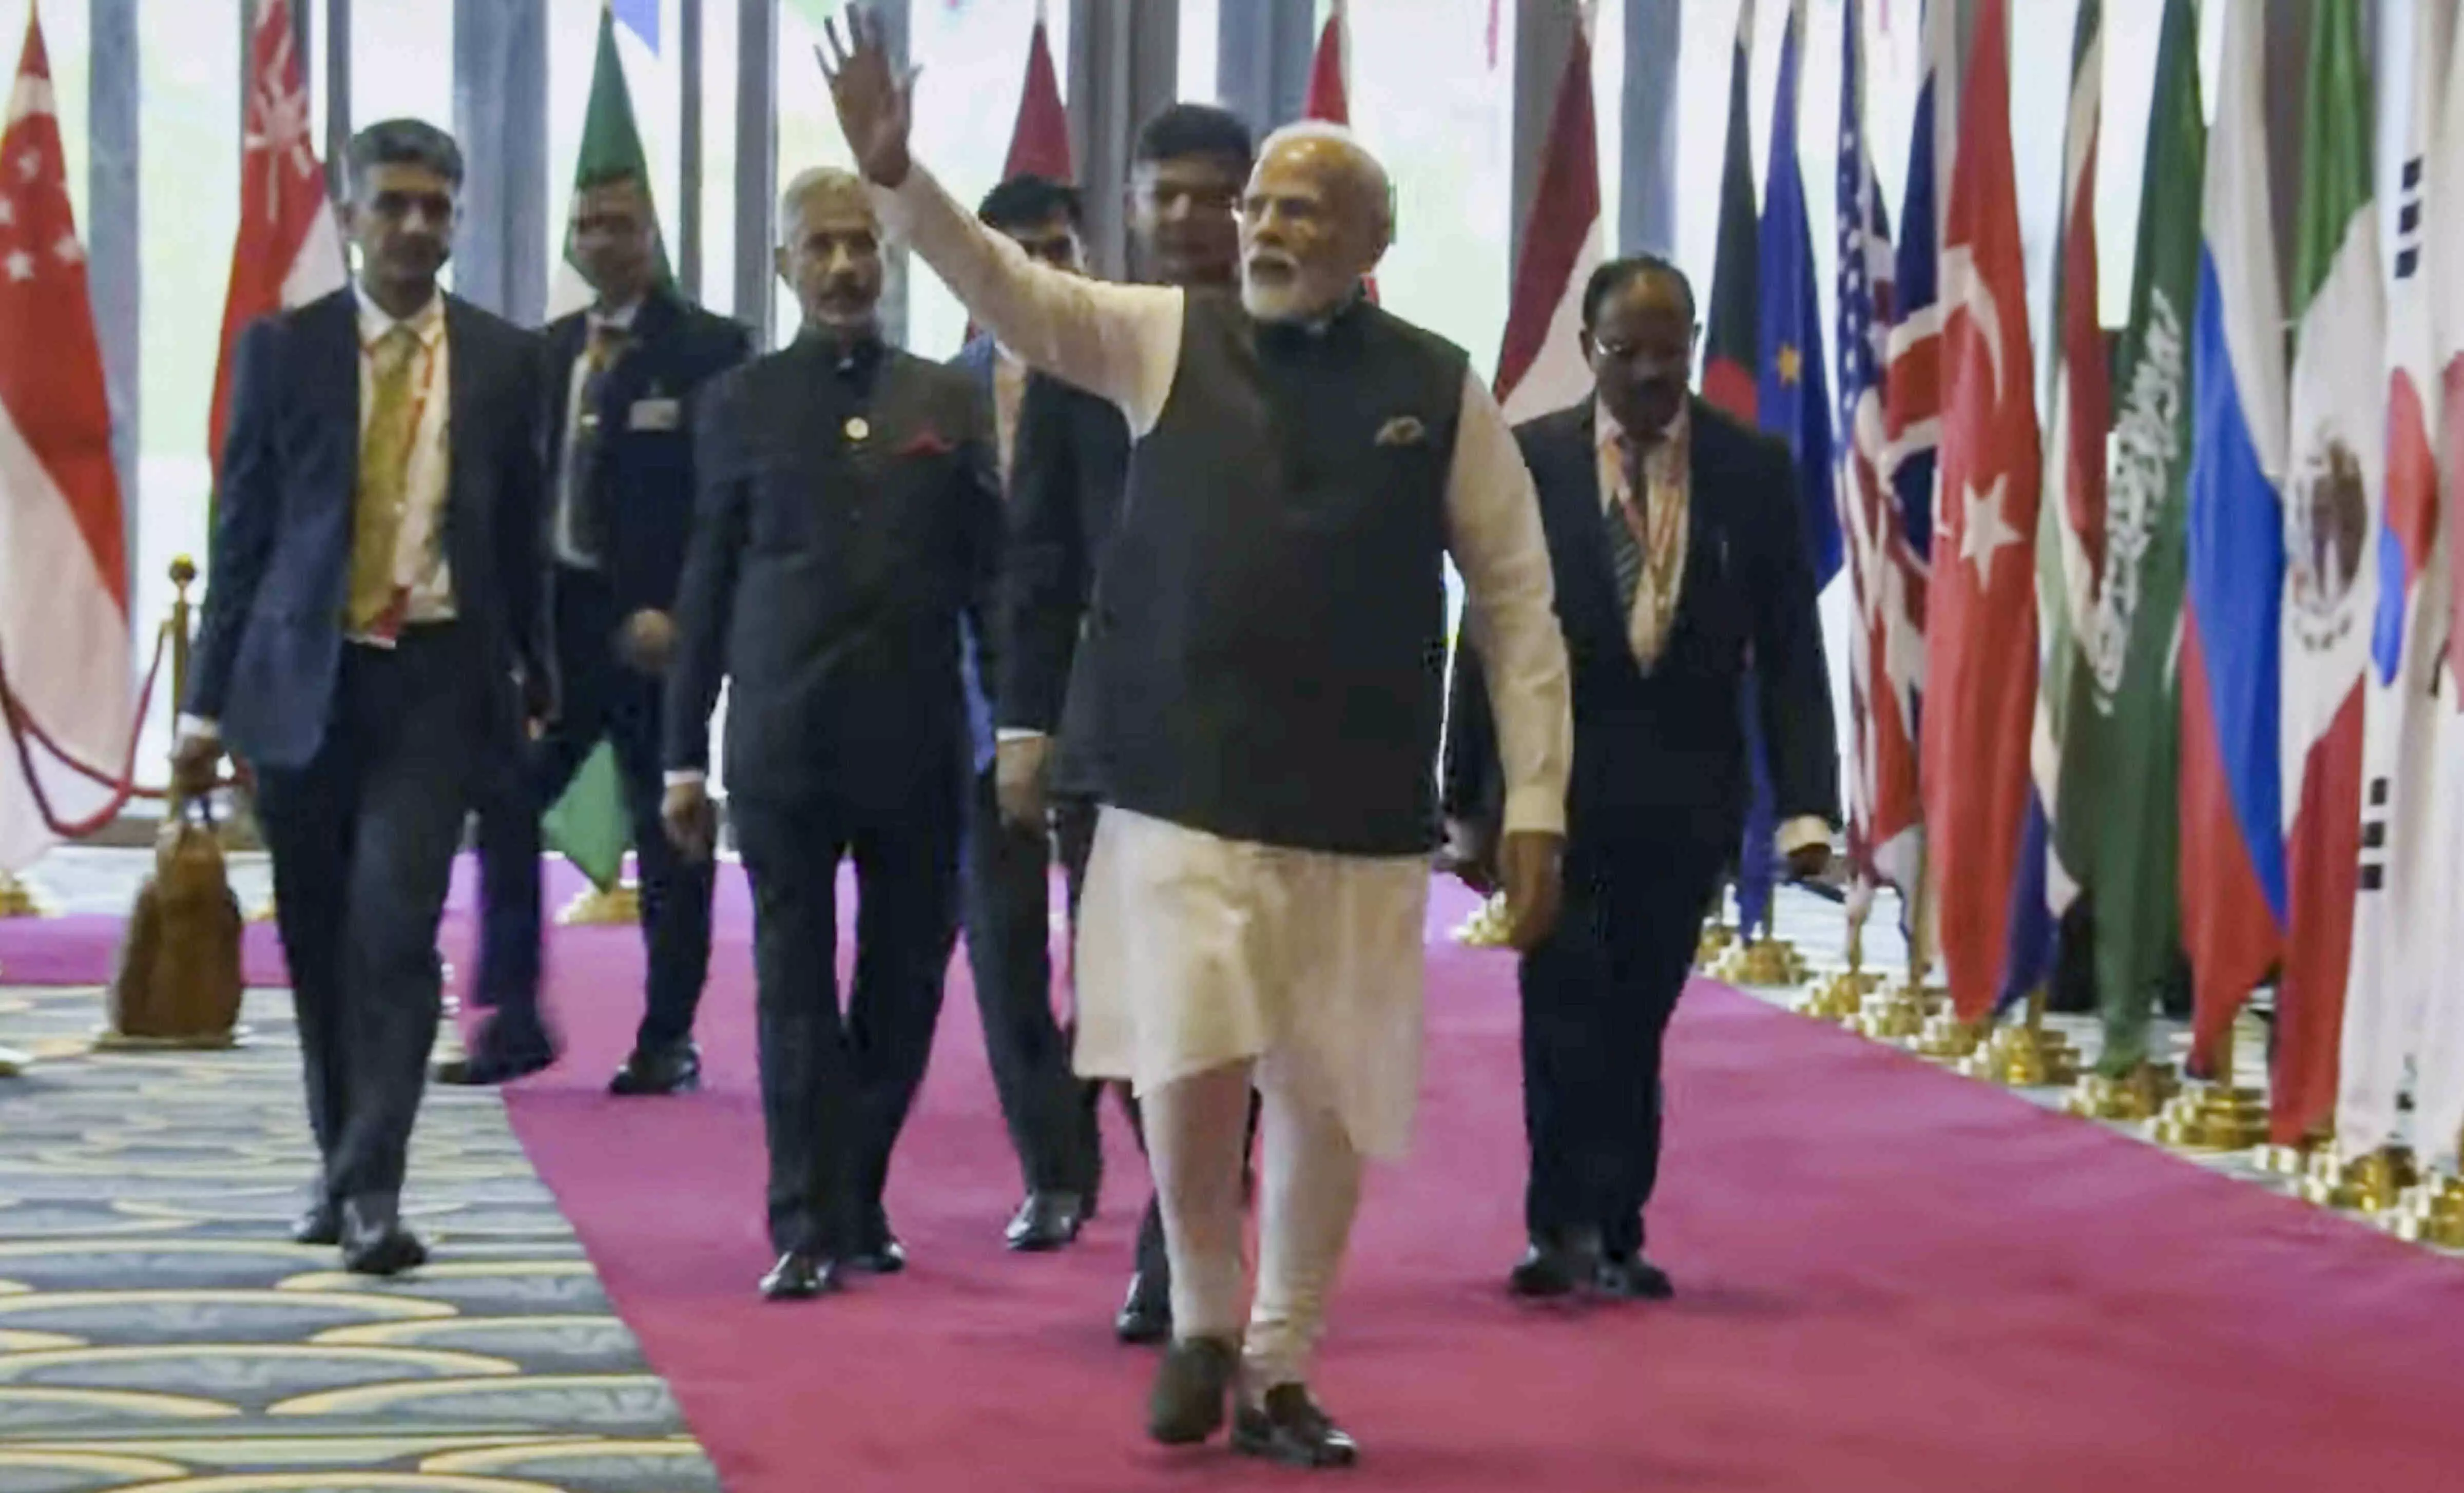 G20 Summit: PM Modi welcomes world leaders at the venue